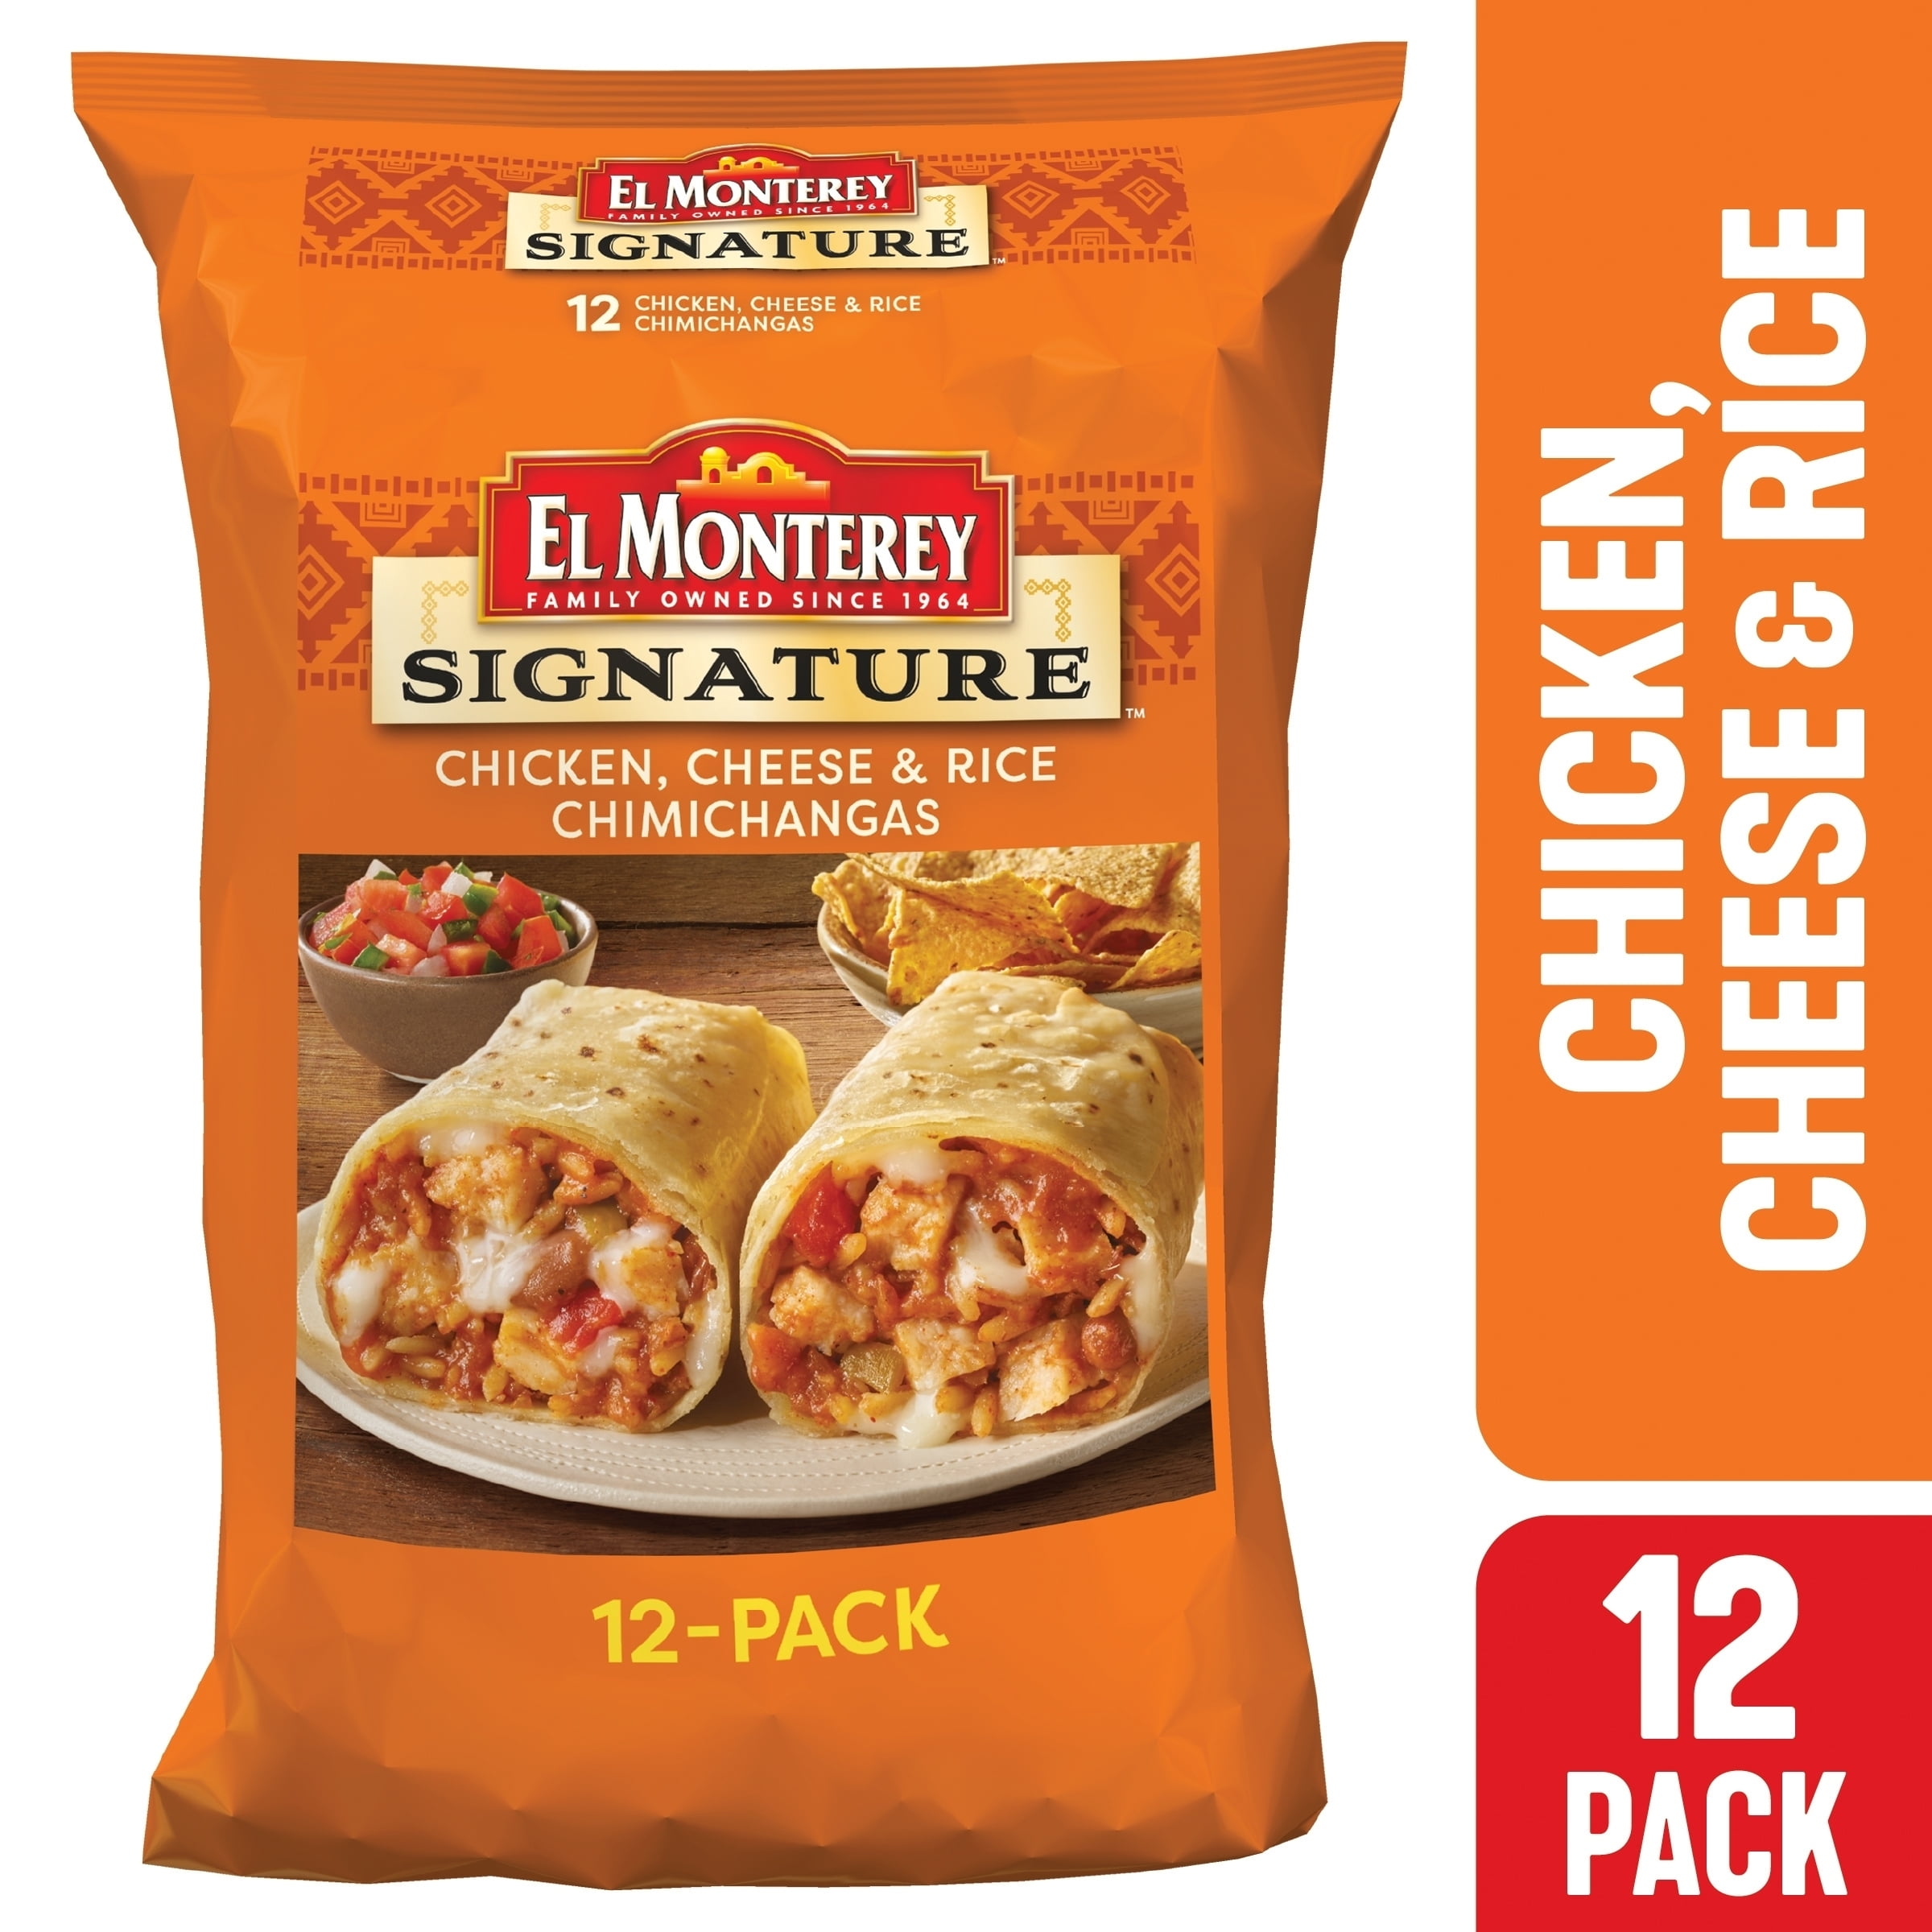 El Monterey Chicken and Cheese Chimichanga Case